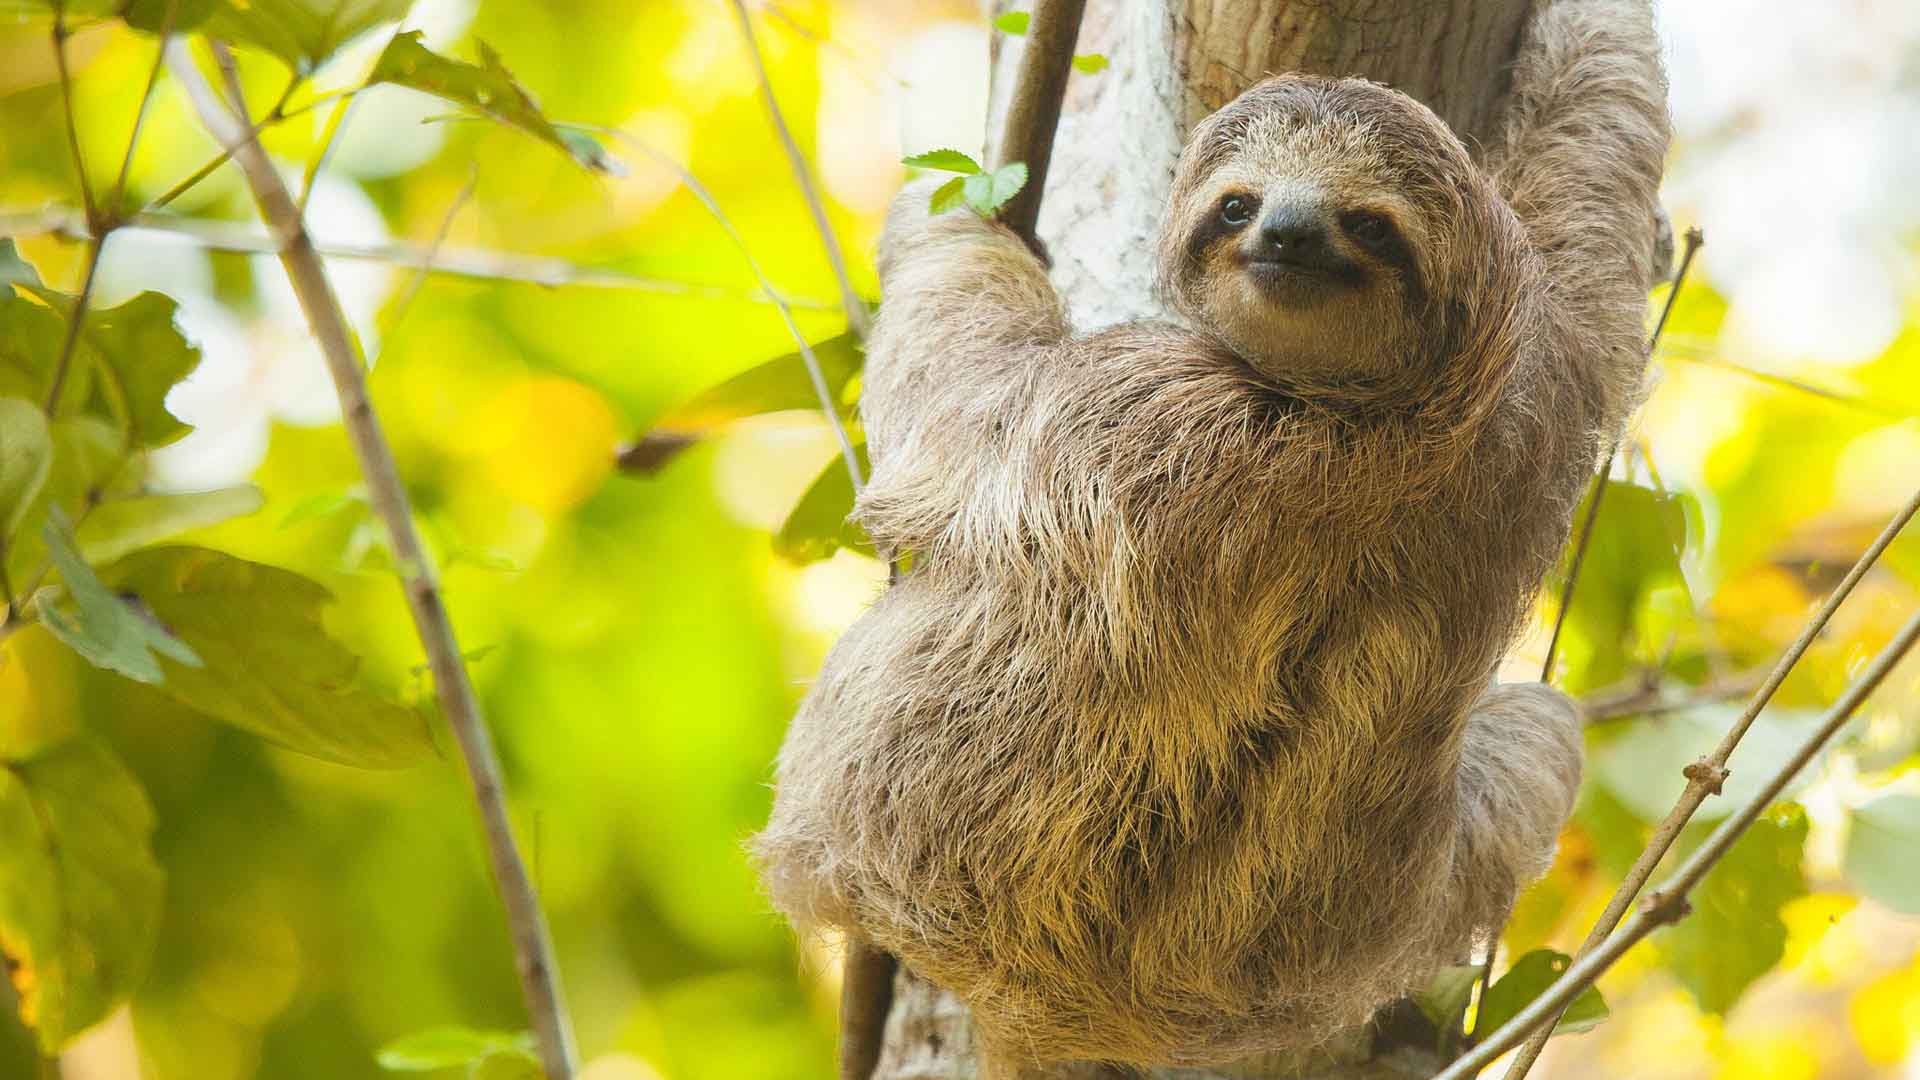 Costa Rica Sloth Complete Guide On How And Where To See Sloths In Costa Rica The Sloth